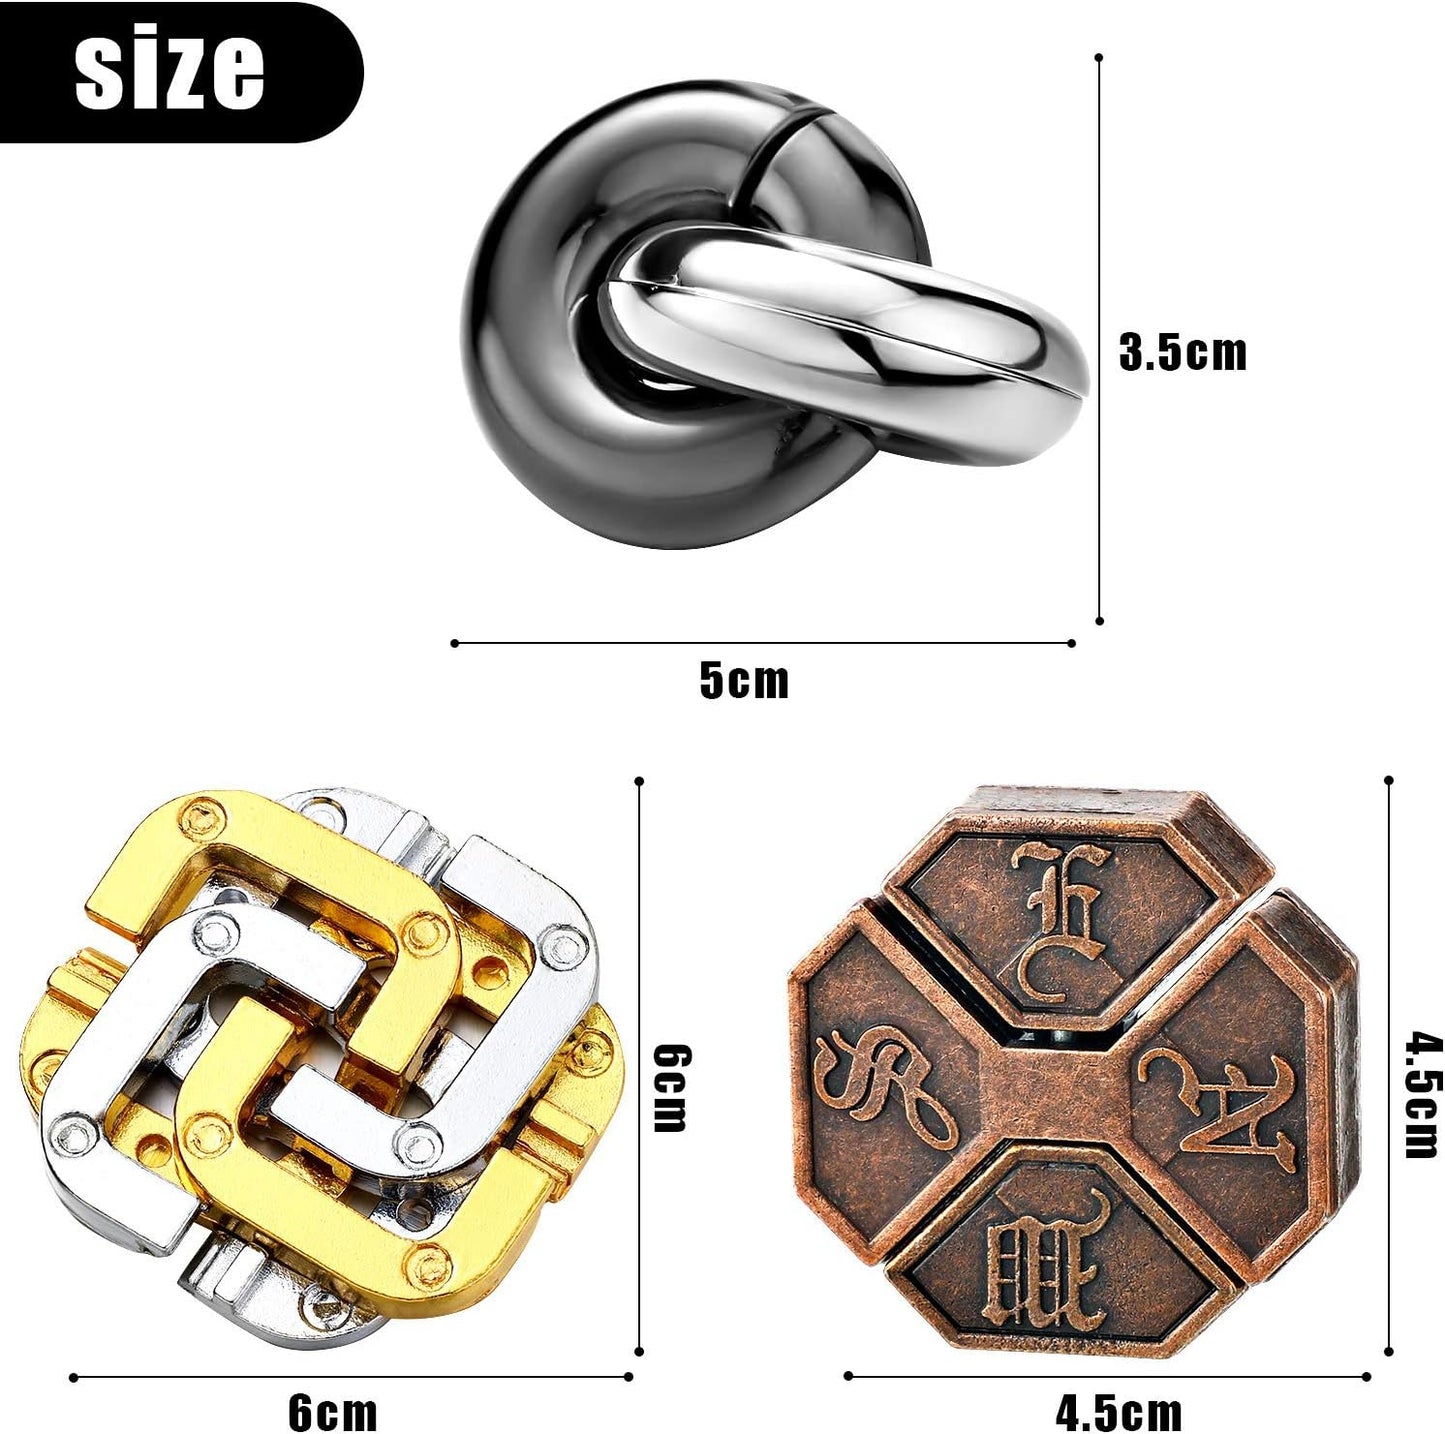 3 Pieces Brain Teaser Metal Puzzle Toy, Handheld 3D Unlock Interlocking Puzzle, Metal Knot Puzzle Mind Games for Adults Teens Educational Toy Gift (Stylish Style)